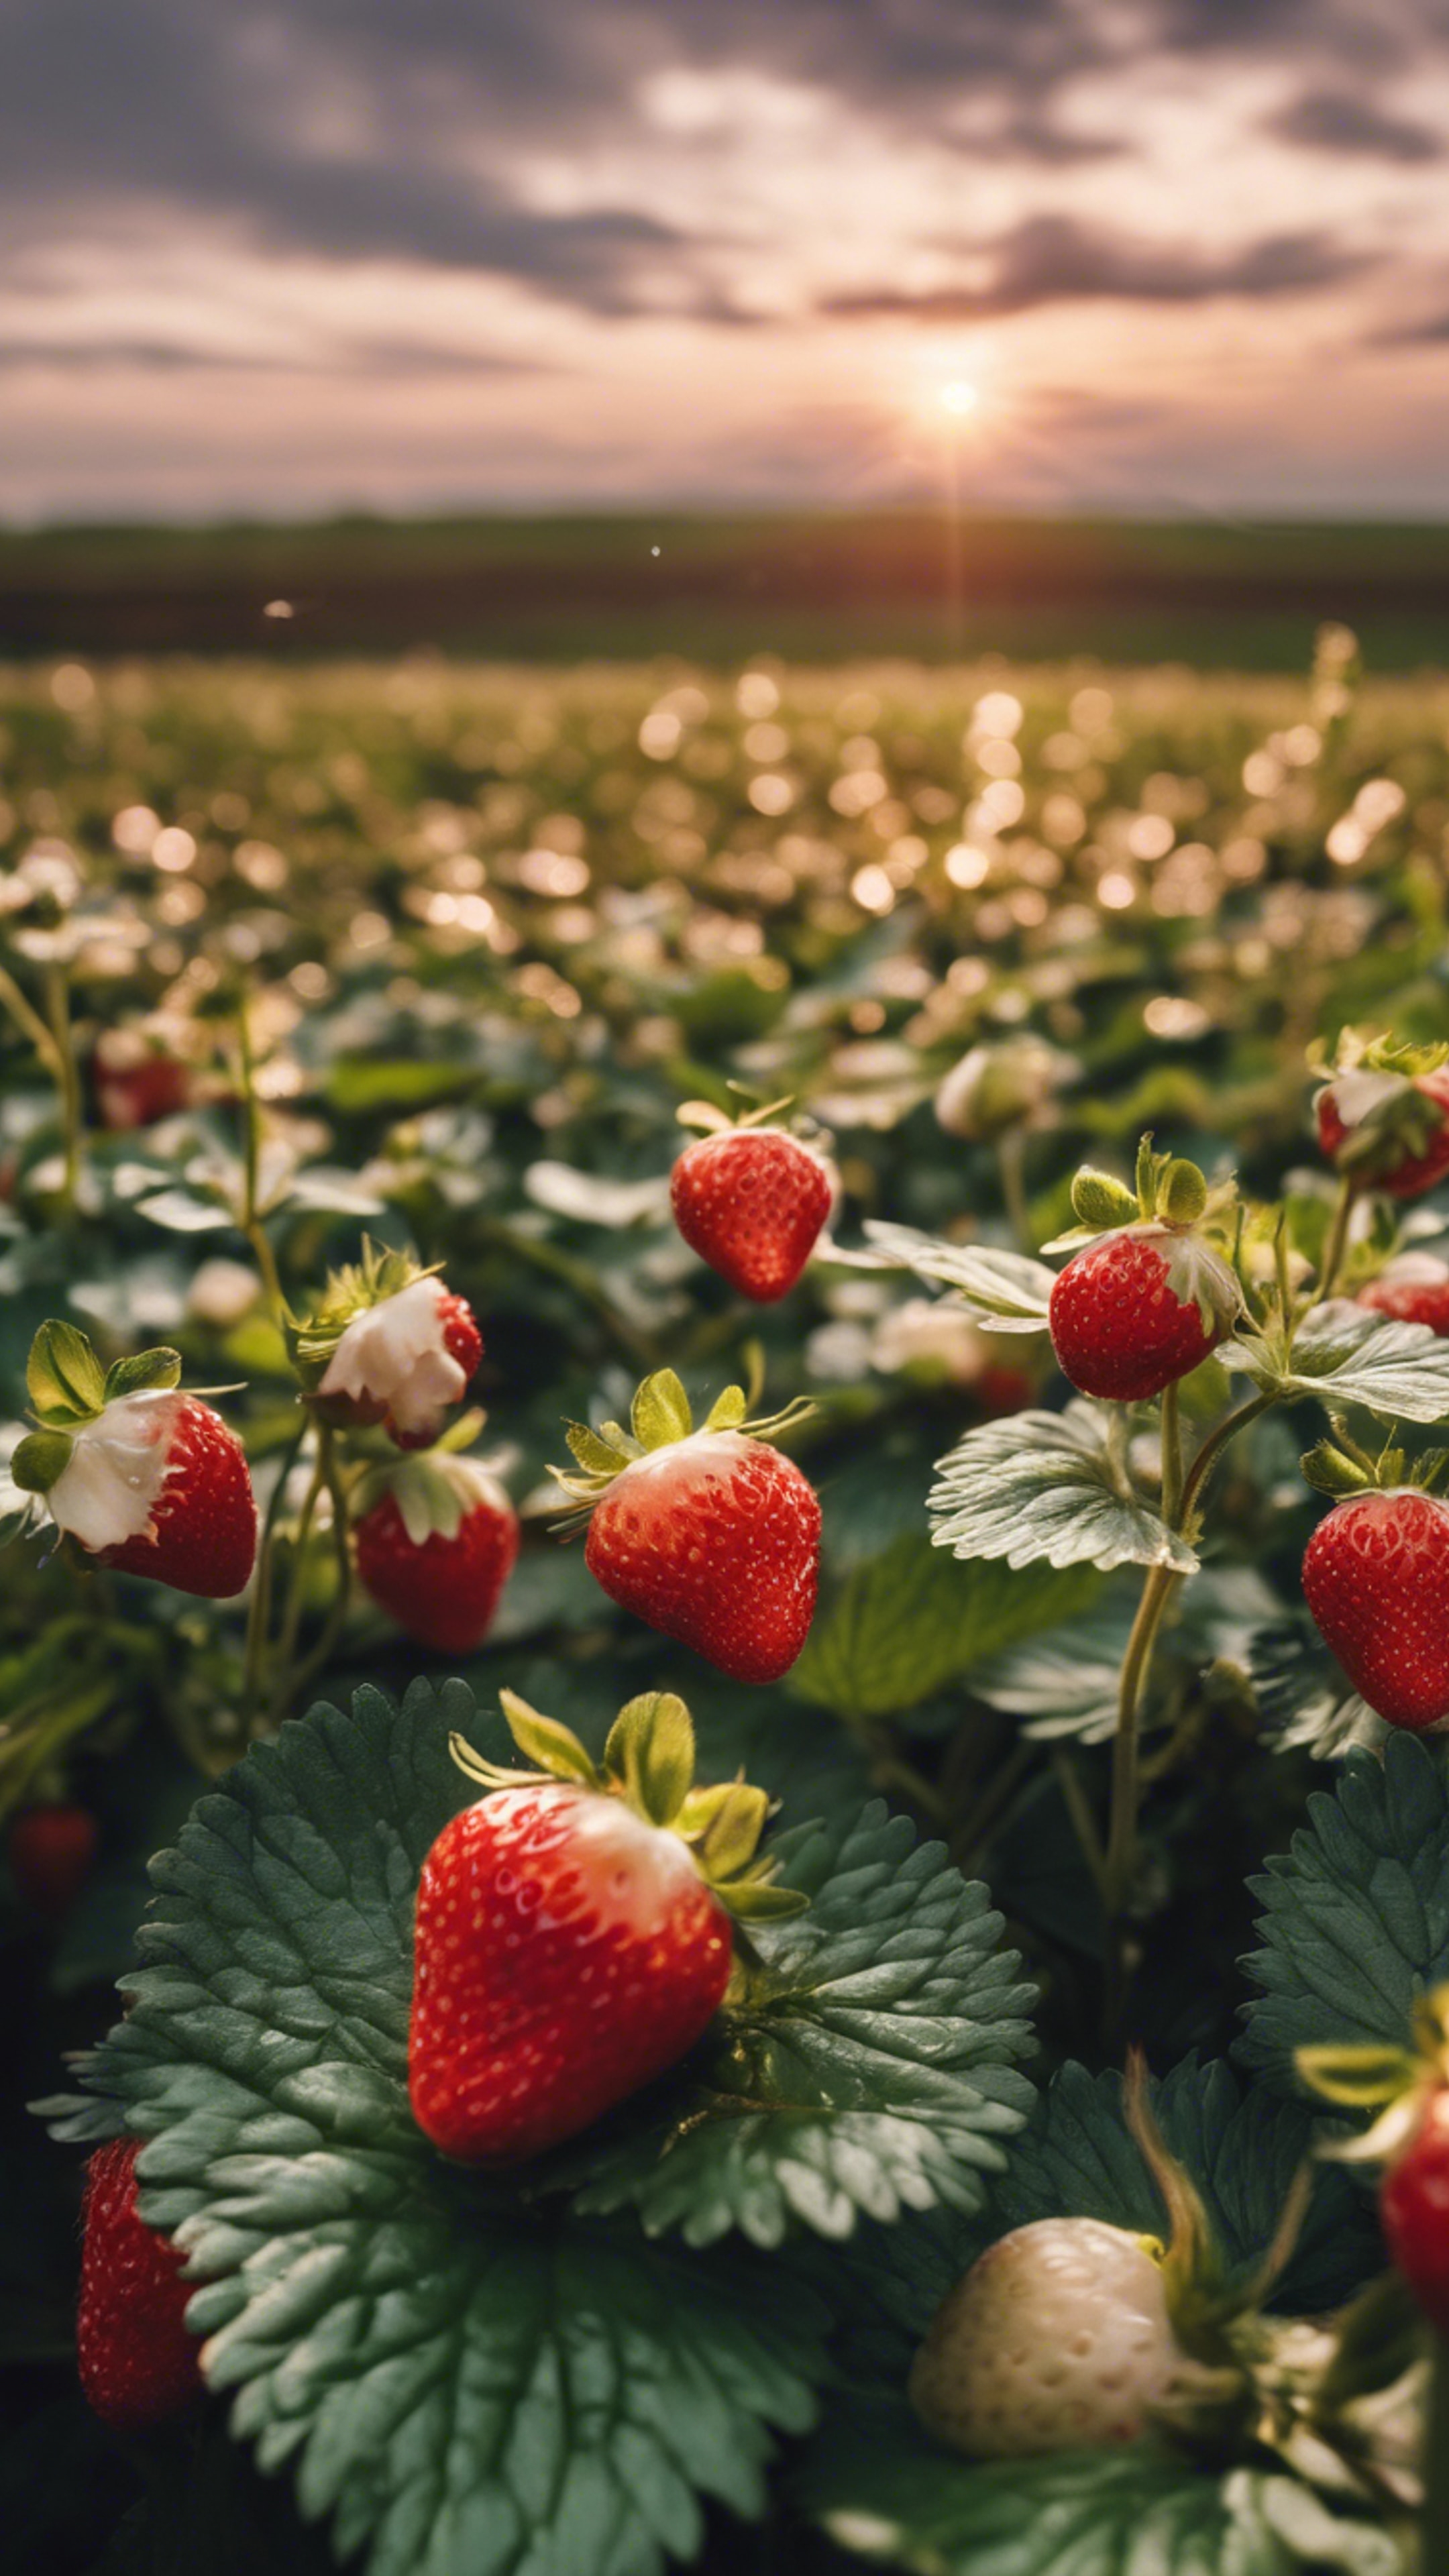 A romantic sunset view over a field of blooming strawberry plants. Wallpaper[3adde1a5bf4e4528ba85]